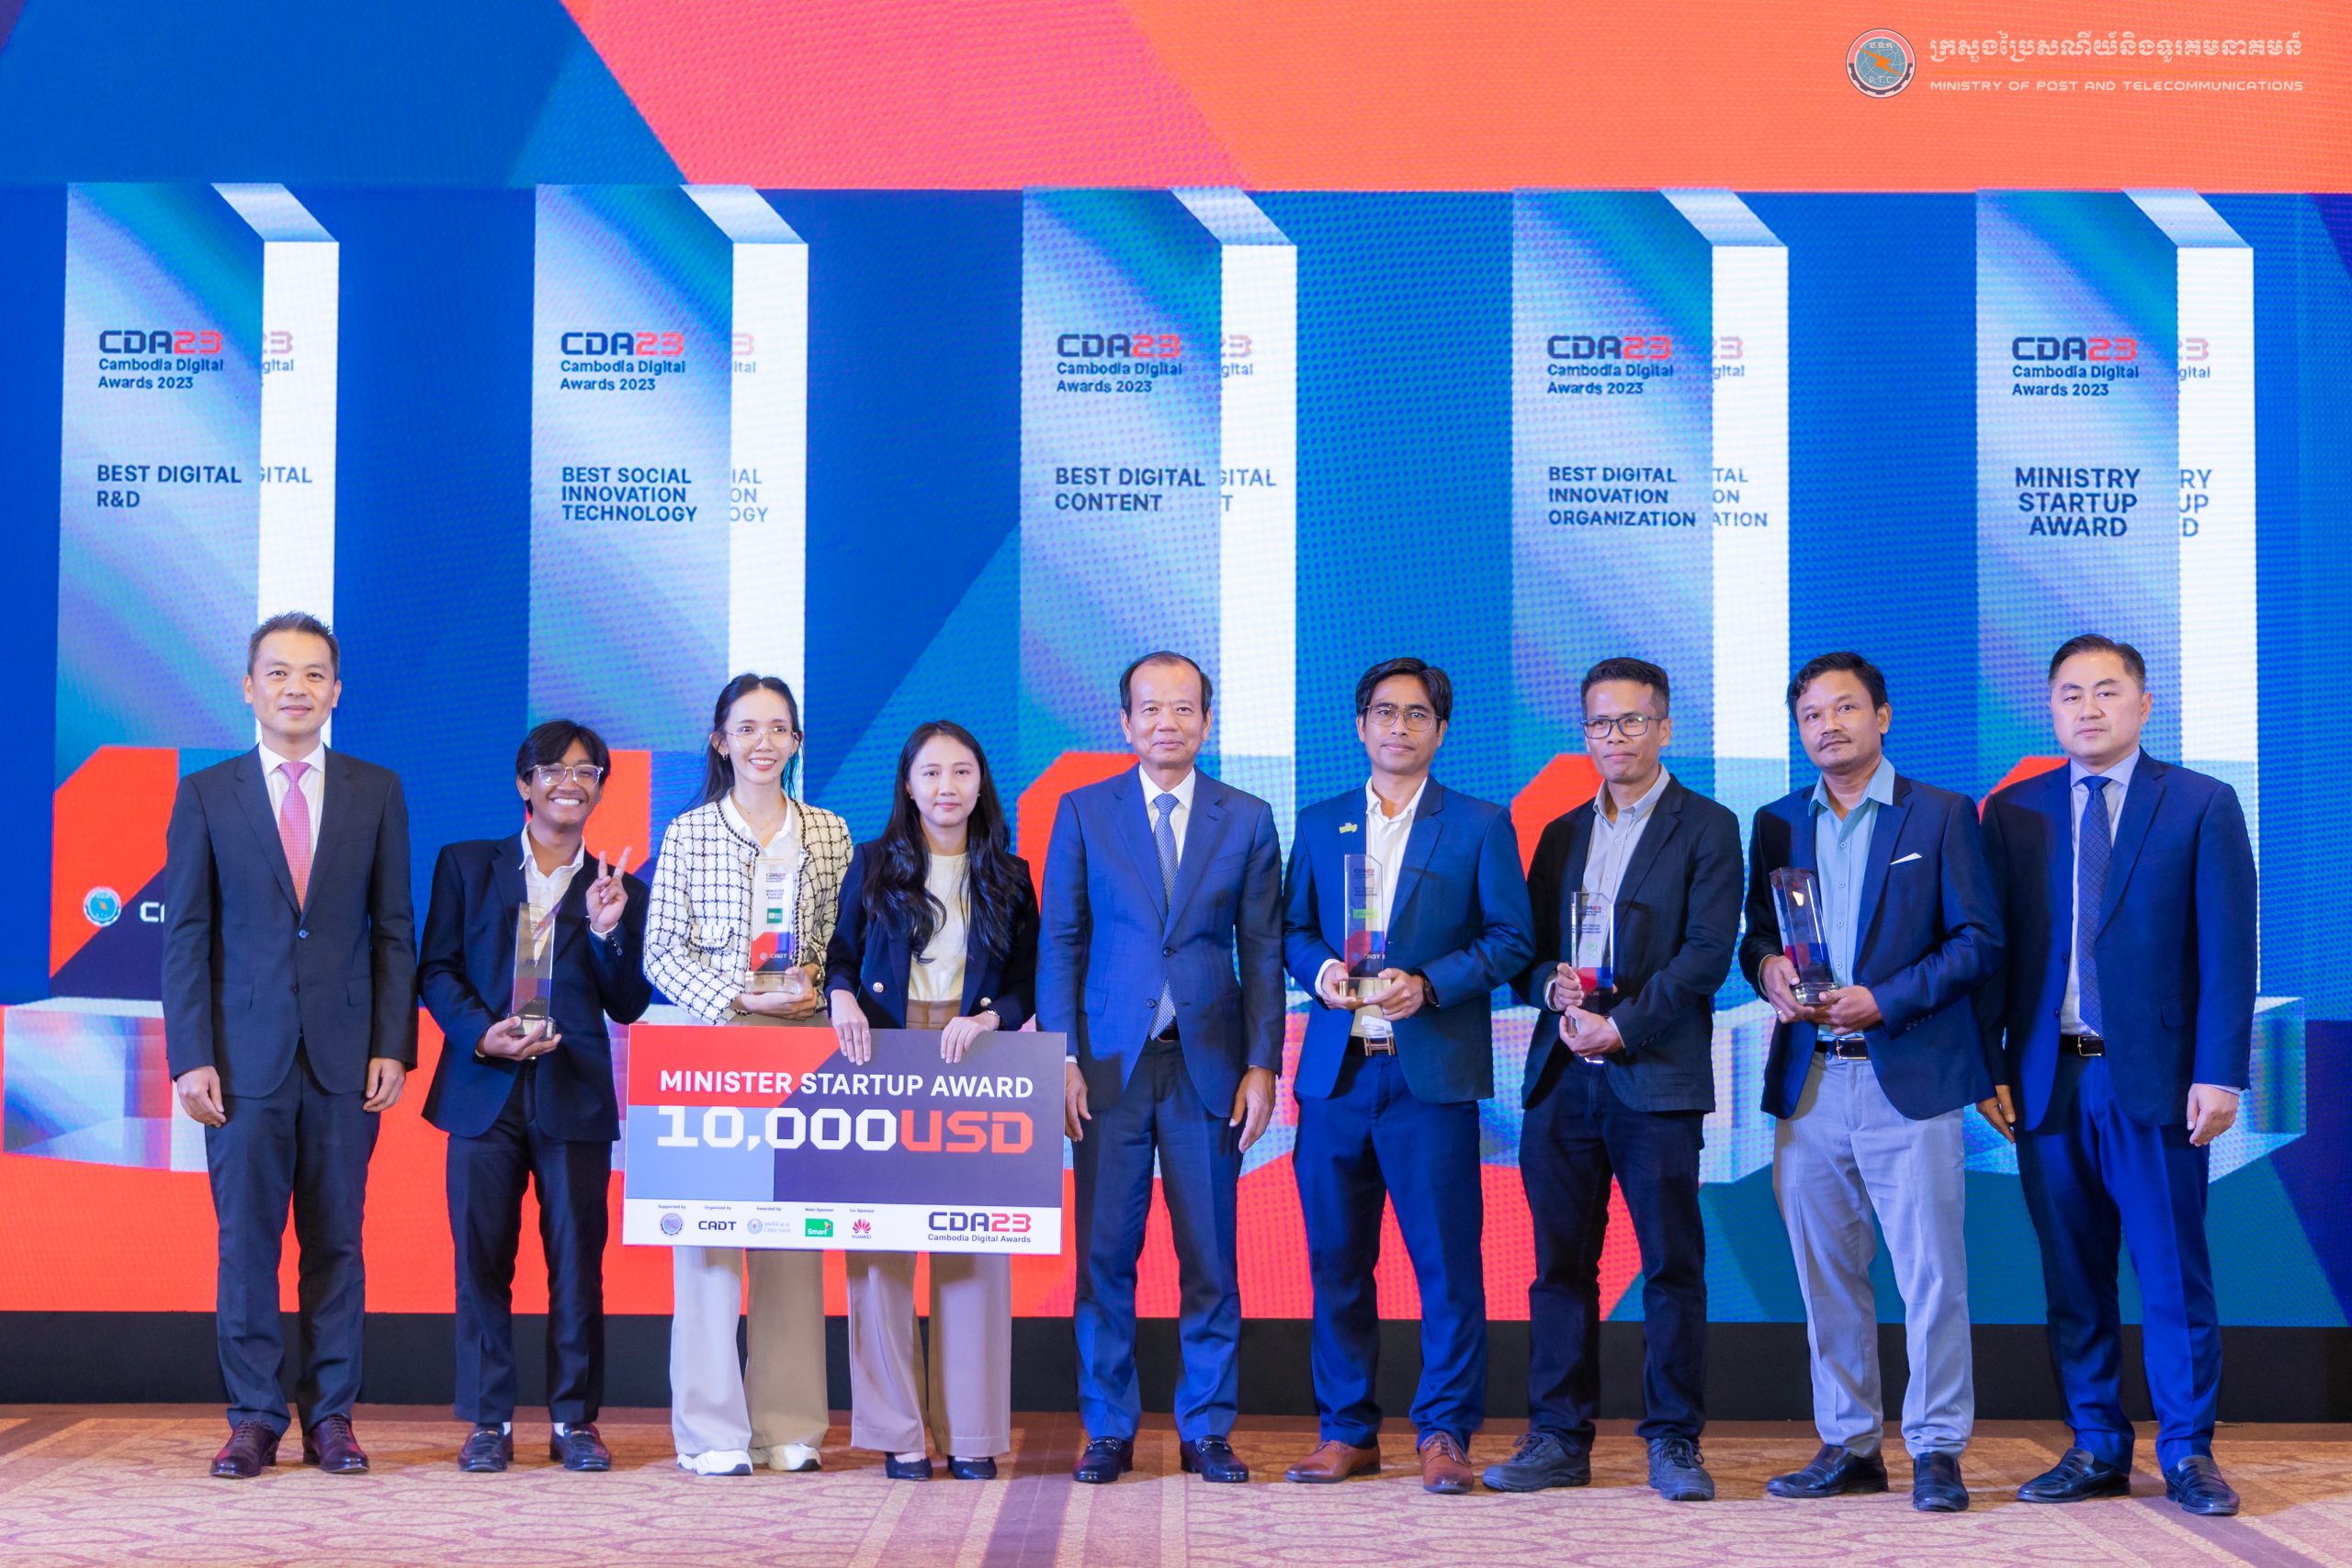 Cambodia Digital and Women in Tech Awards: Pioneers in Digital Innovation Recognized